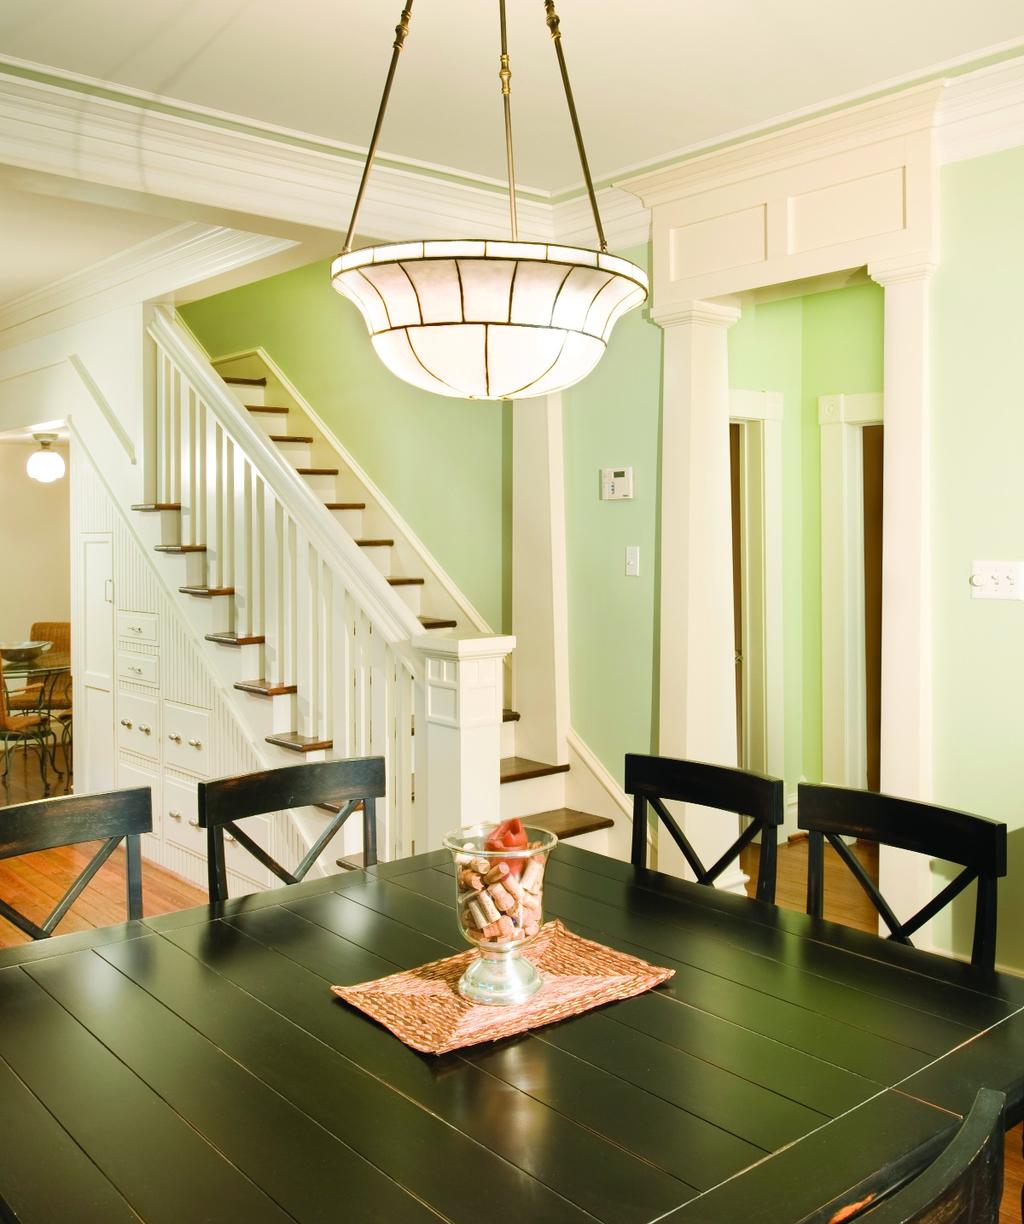 A soothing green wall color was pre-existing when Wendy first purchased the home and was so pleasing the Parkers opted to keep it and extend it up the stairway.